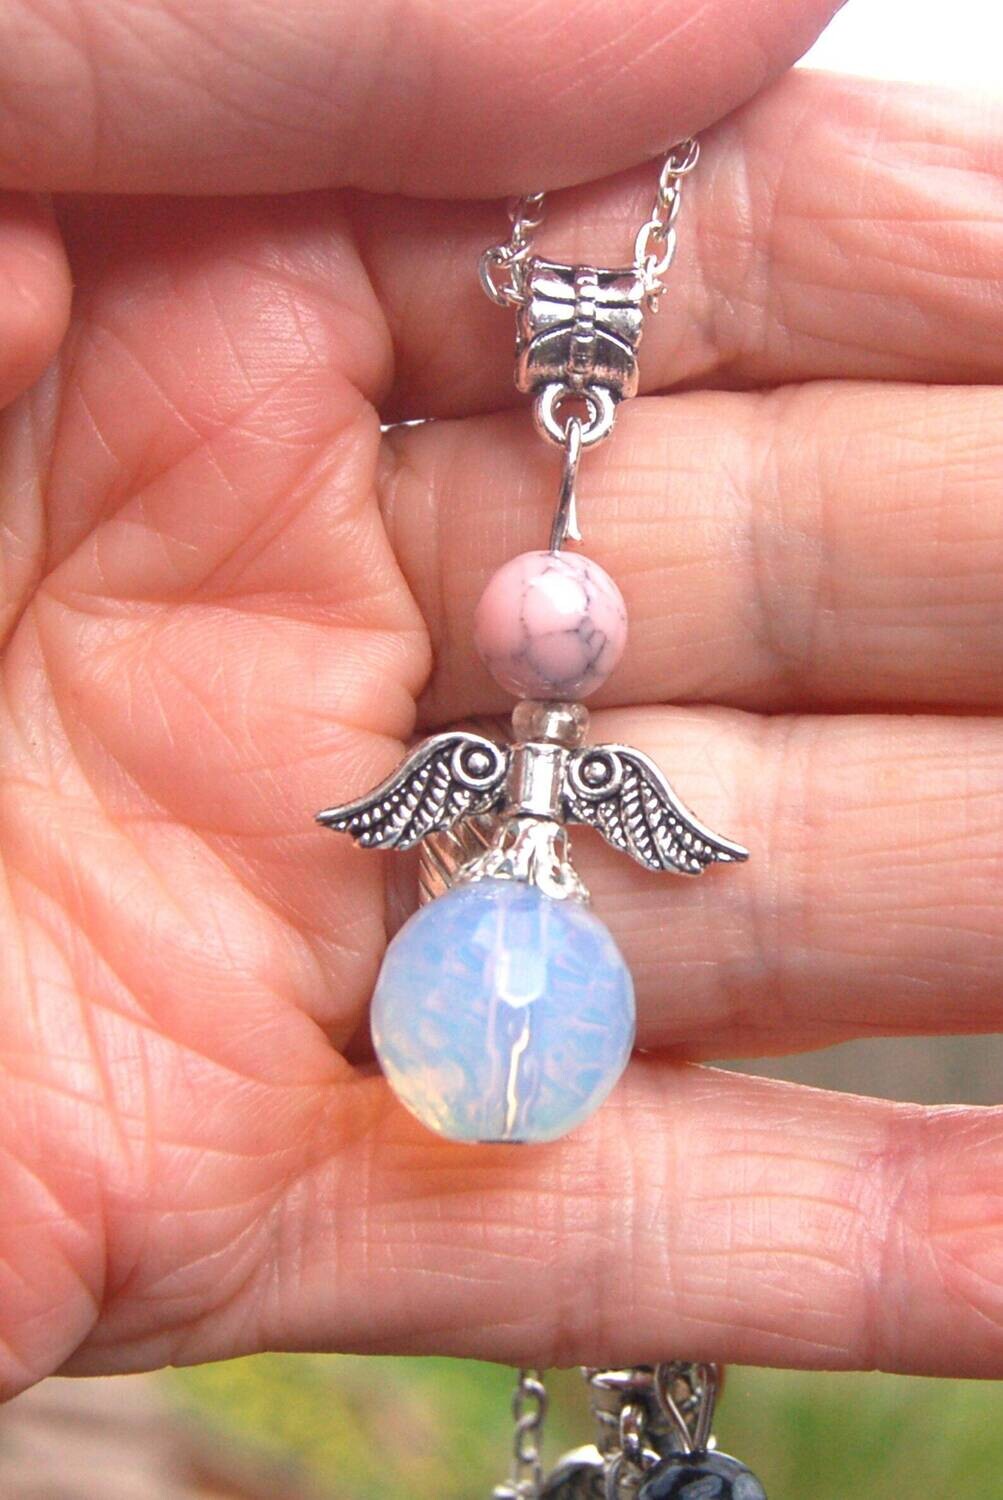 Beautiful Handcrafted Opalite and Rhodochrosite Crystal Guardian Angel Pendant Charm - Boxed Gift - Inner Child Healing